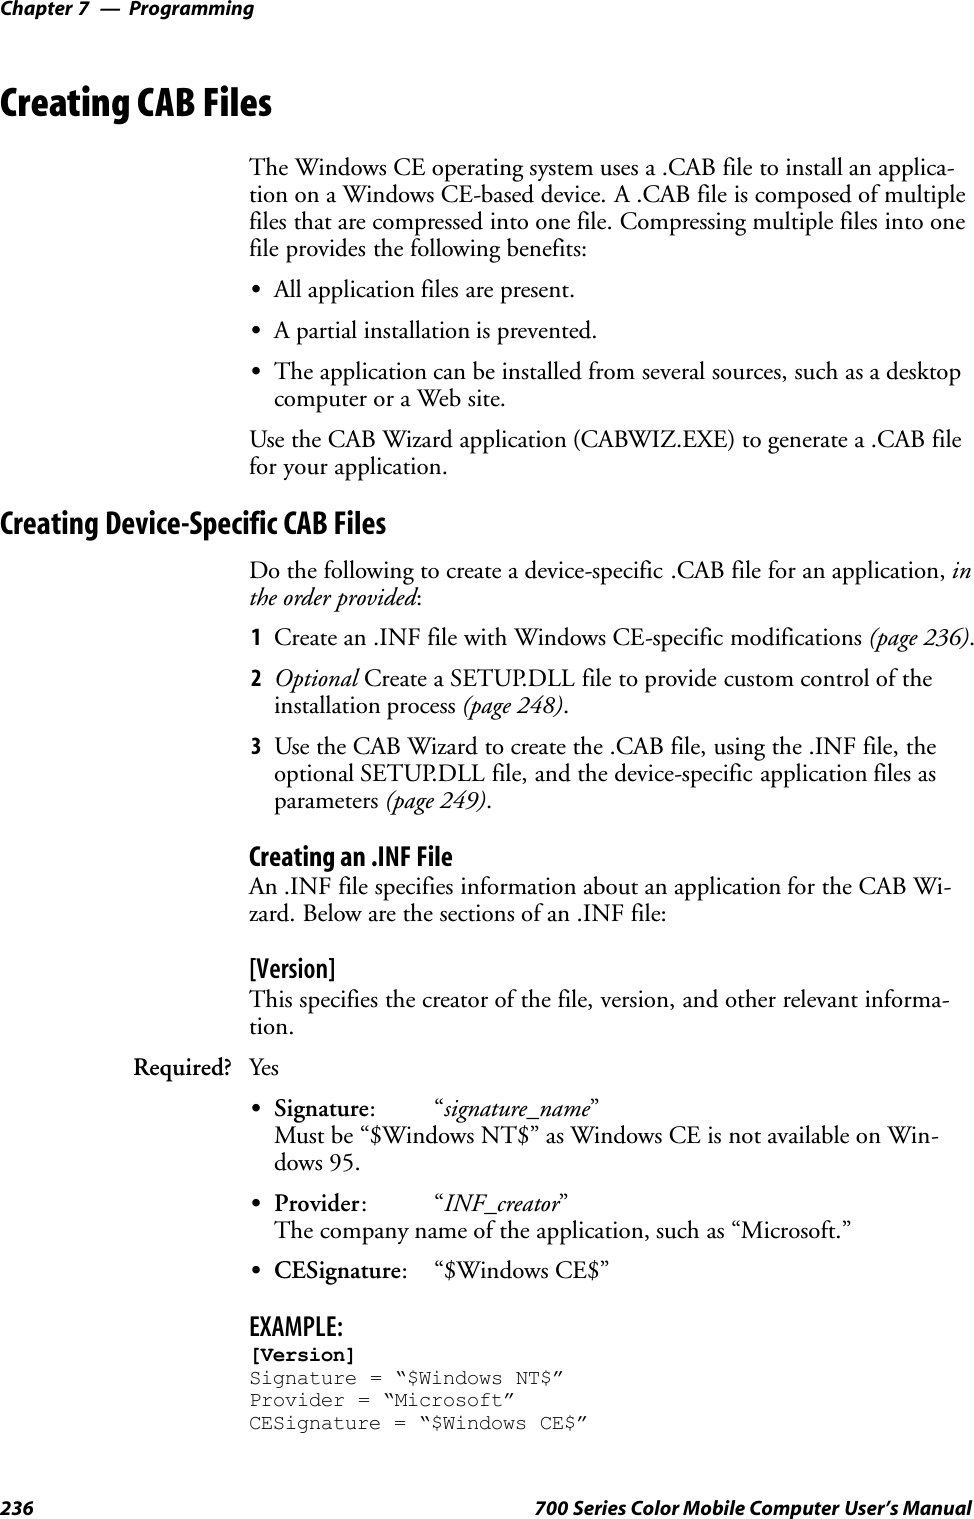 ProgrammingChapter —7236 700 Series Color Mobile Computer User’s ManualCreating CAB FilesThe Windows CE operating system uses a .CAB file to install an applica-tion on a Windows CE-based device. A .CAB file is composed of multiplefiles that are compressed into one file. Compressing multiple files into onefile provides the following benefits:SAll application files are present.SA partial installation is prevented.SThe application can be installed from several sources, such as a desktopcomputer or a Web site.Use the CAB Wizard application (CABWIZ.EXE) to generate a .CAB filefor your application.Creating Device-Specific CAB FilesDo the following to create a device-specific .CAB file for an application, inthe order provided:1Create an .INF file with Windows CE-specific modifications (page 236).2Optional Create a SETUP.DLL file to provide custom control of theinstallation process (page 248).3Use the CAB Wizard to create the .CAB file, using the .INF file, theoptional SETUP.DLL file, and the device-specific application files asparameters (page 249).Creating an .INF FileAn .INF file specifies information about an application for the CAB Wi-zard. Below are the sections of an .INF file:[Version]This specifies the creator of the file, version, and other relevant informa-tion.Required? YesSSignature:“signature_name”Must be “$Windows NT$” as Windows CE is not available on Win-dows 95.SProvider:“INF_creator”The company name of the application, such as “Microsoft.”SCESignature: “$Windows CE$”EXAMPLE:[Version]Signature = “$Windows NT$”Provider = “Microsoft”CESignature = “$Windows CE$”